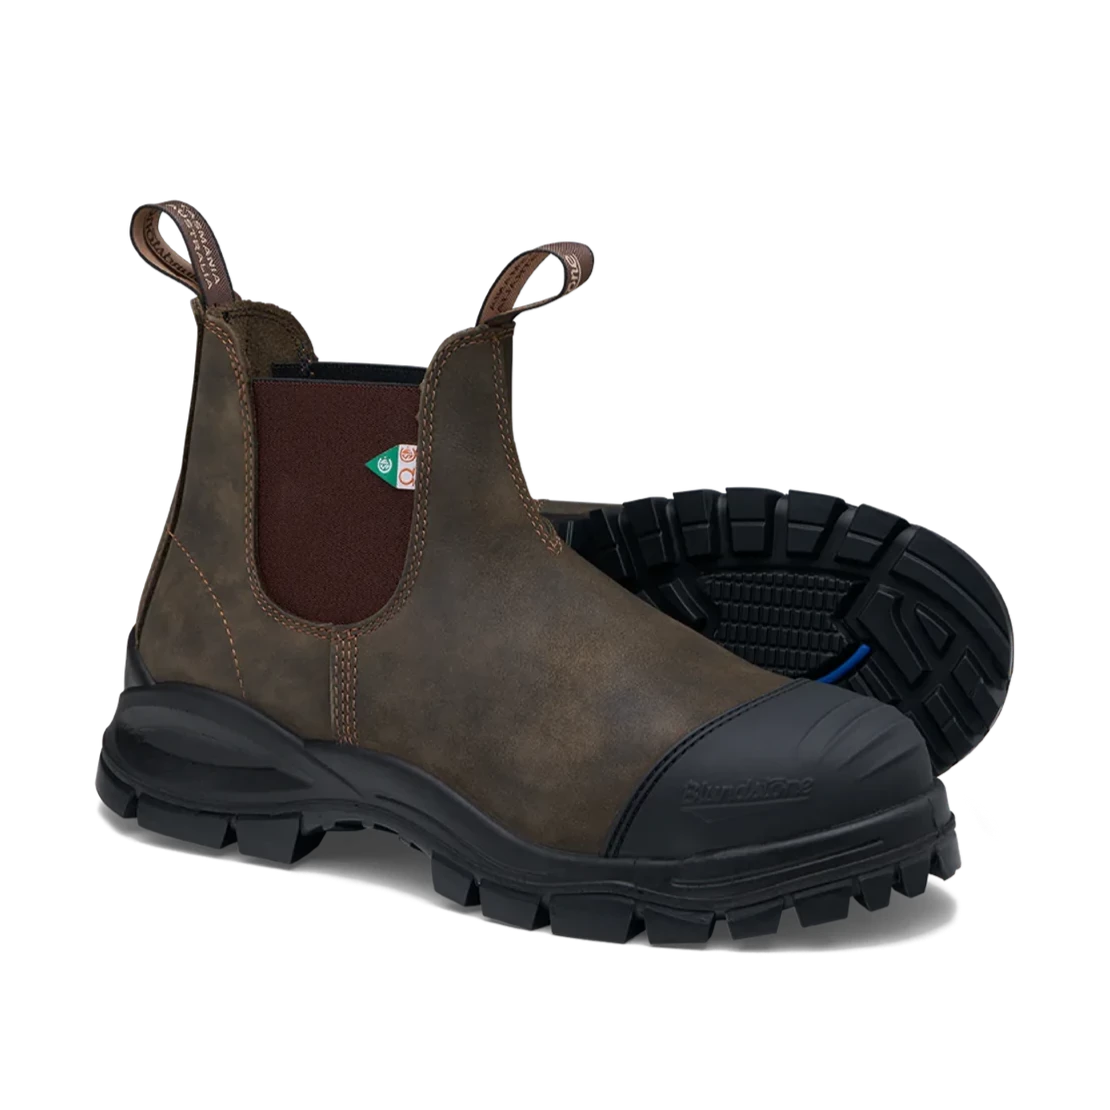 Blundstone #962 - XFR CSA Work and Safety boot rustic brown pair sole